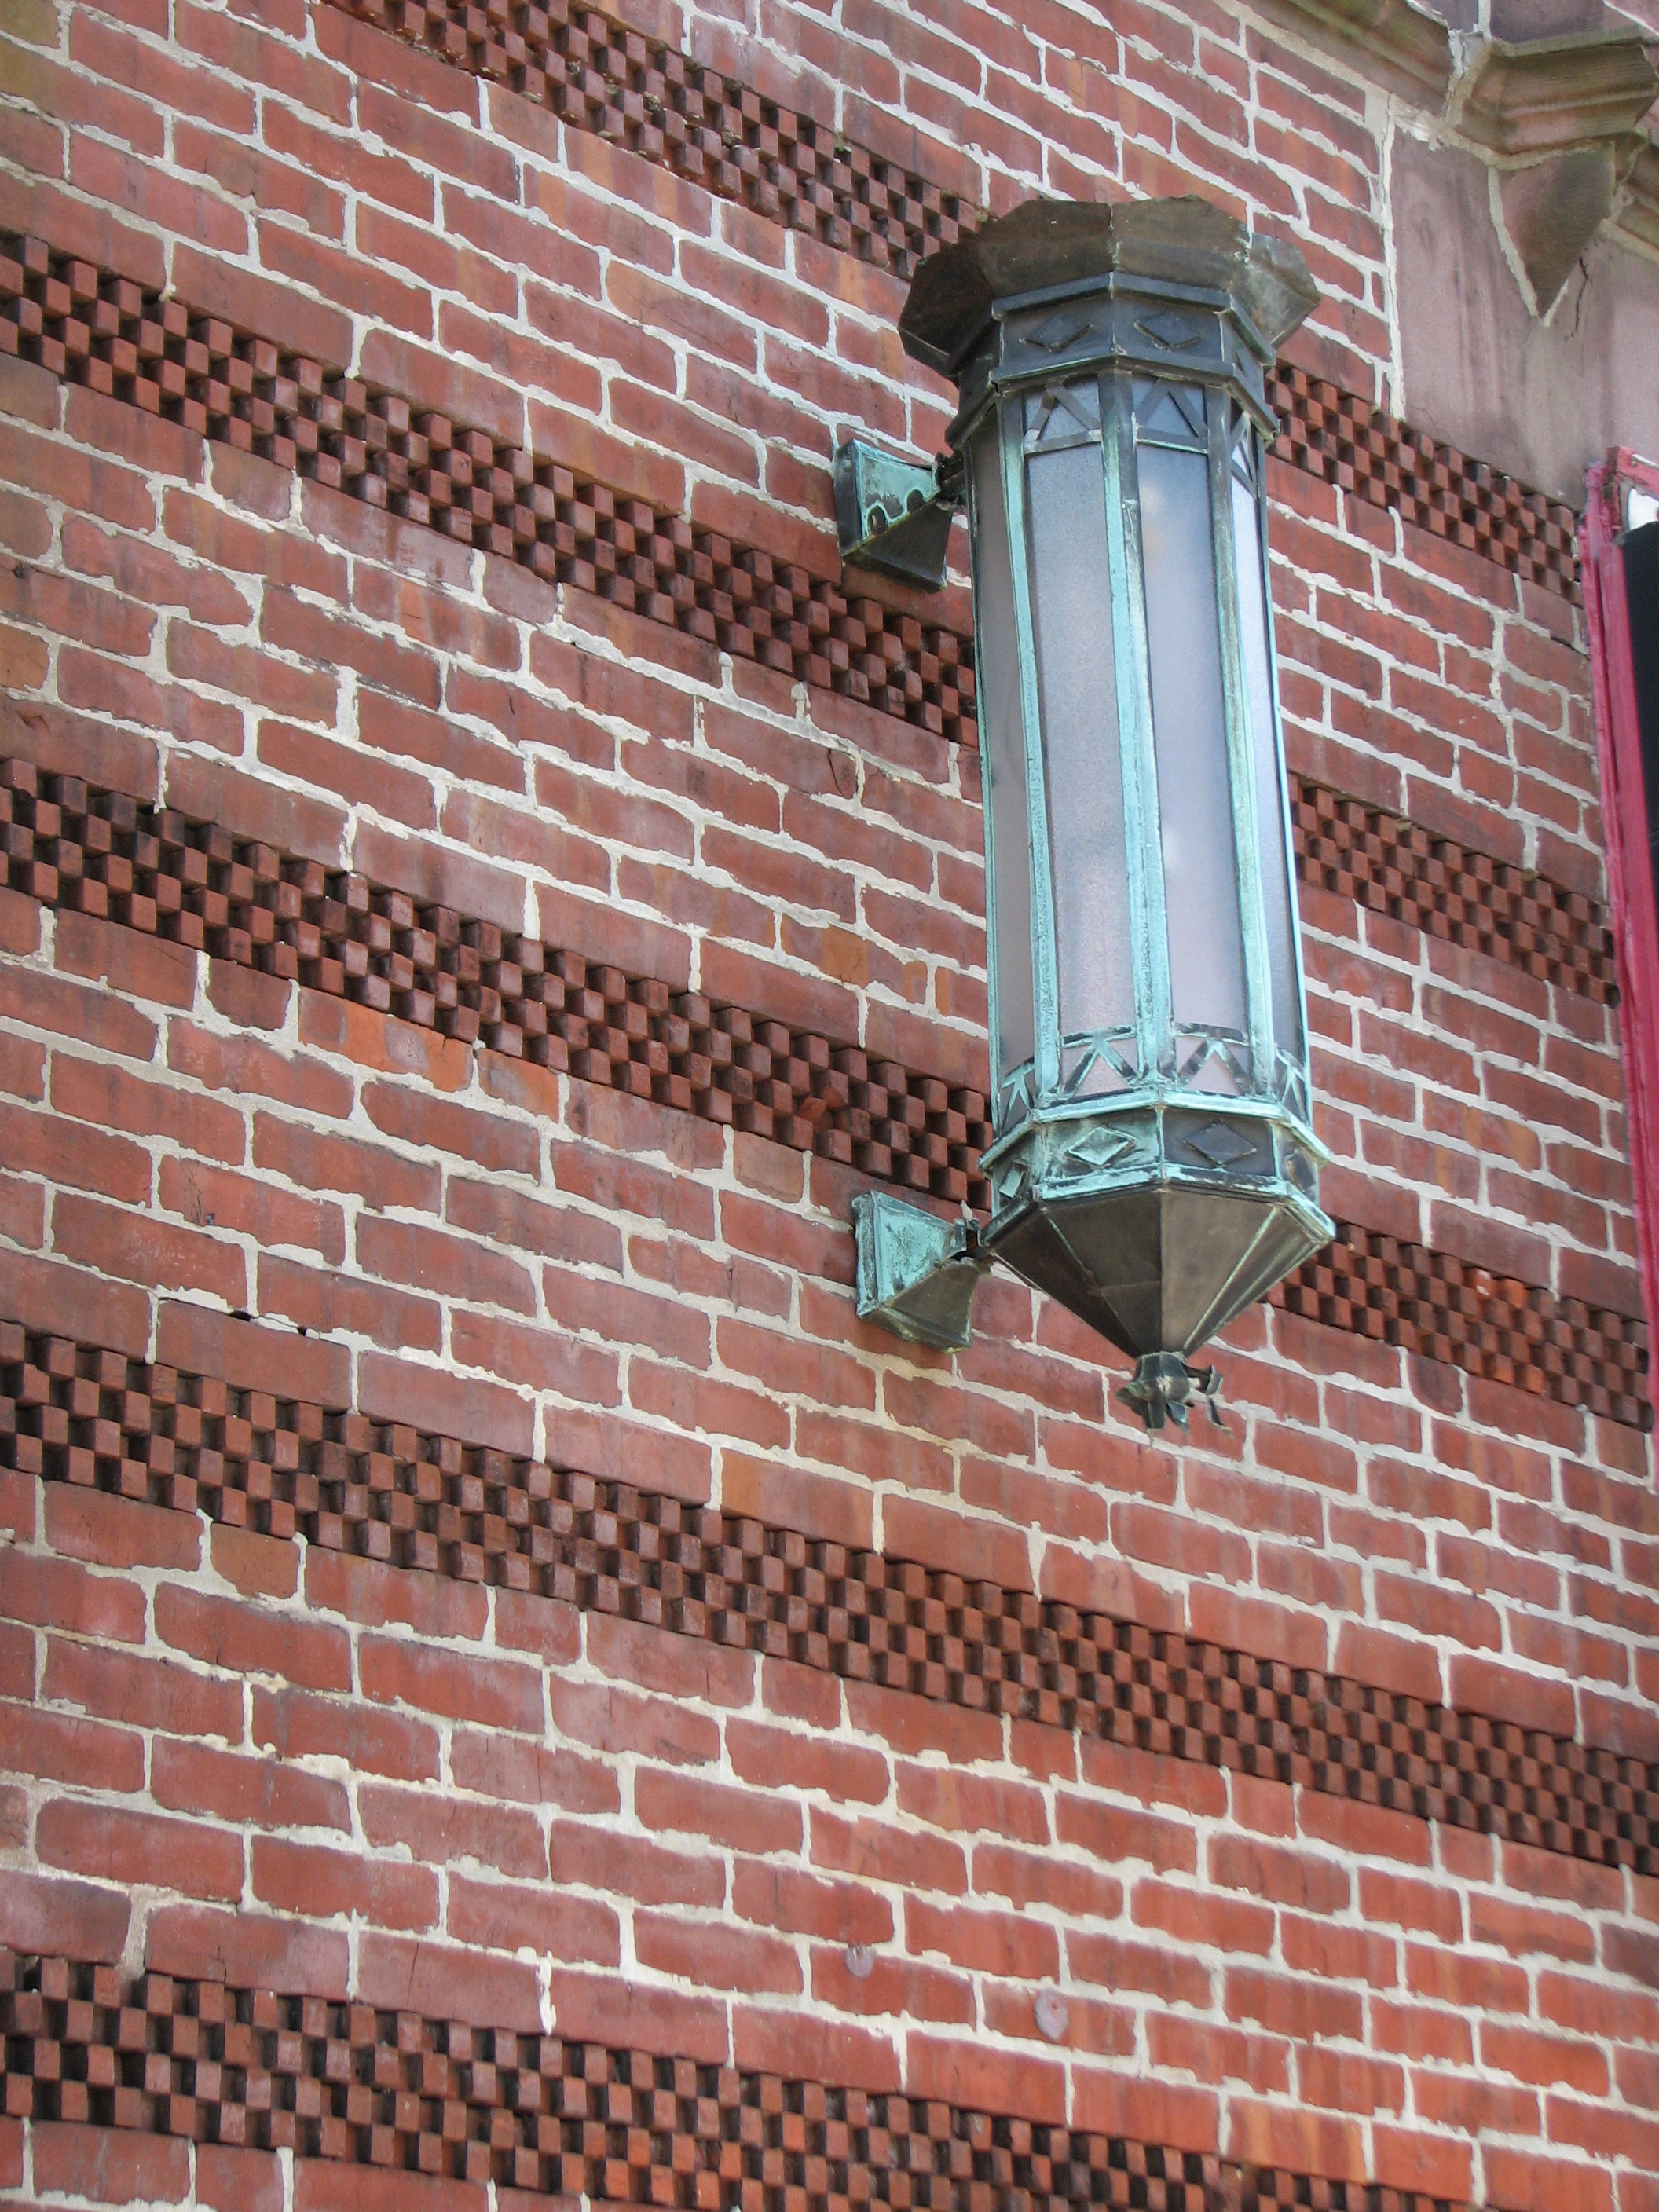 Original lamp fixtures still hang on the decorative brick on either side of the building’s entrance.